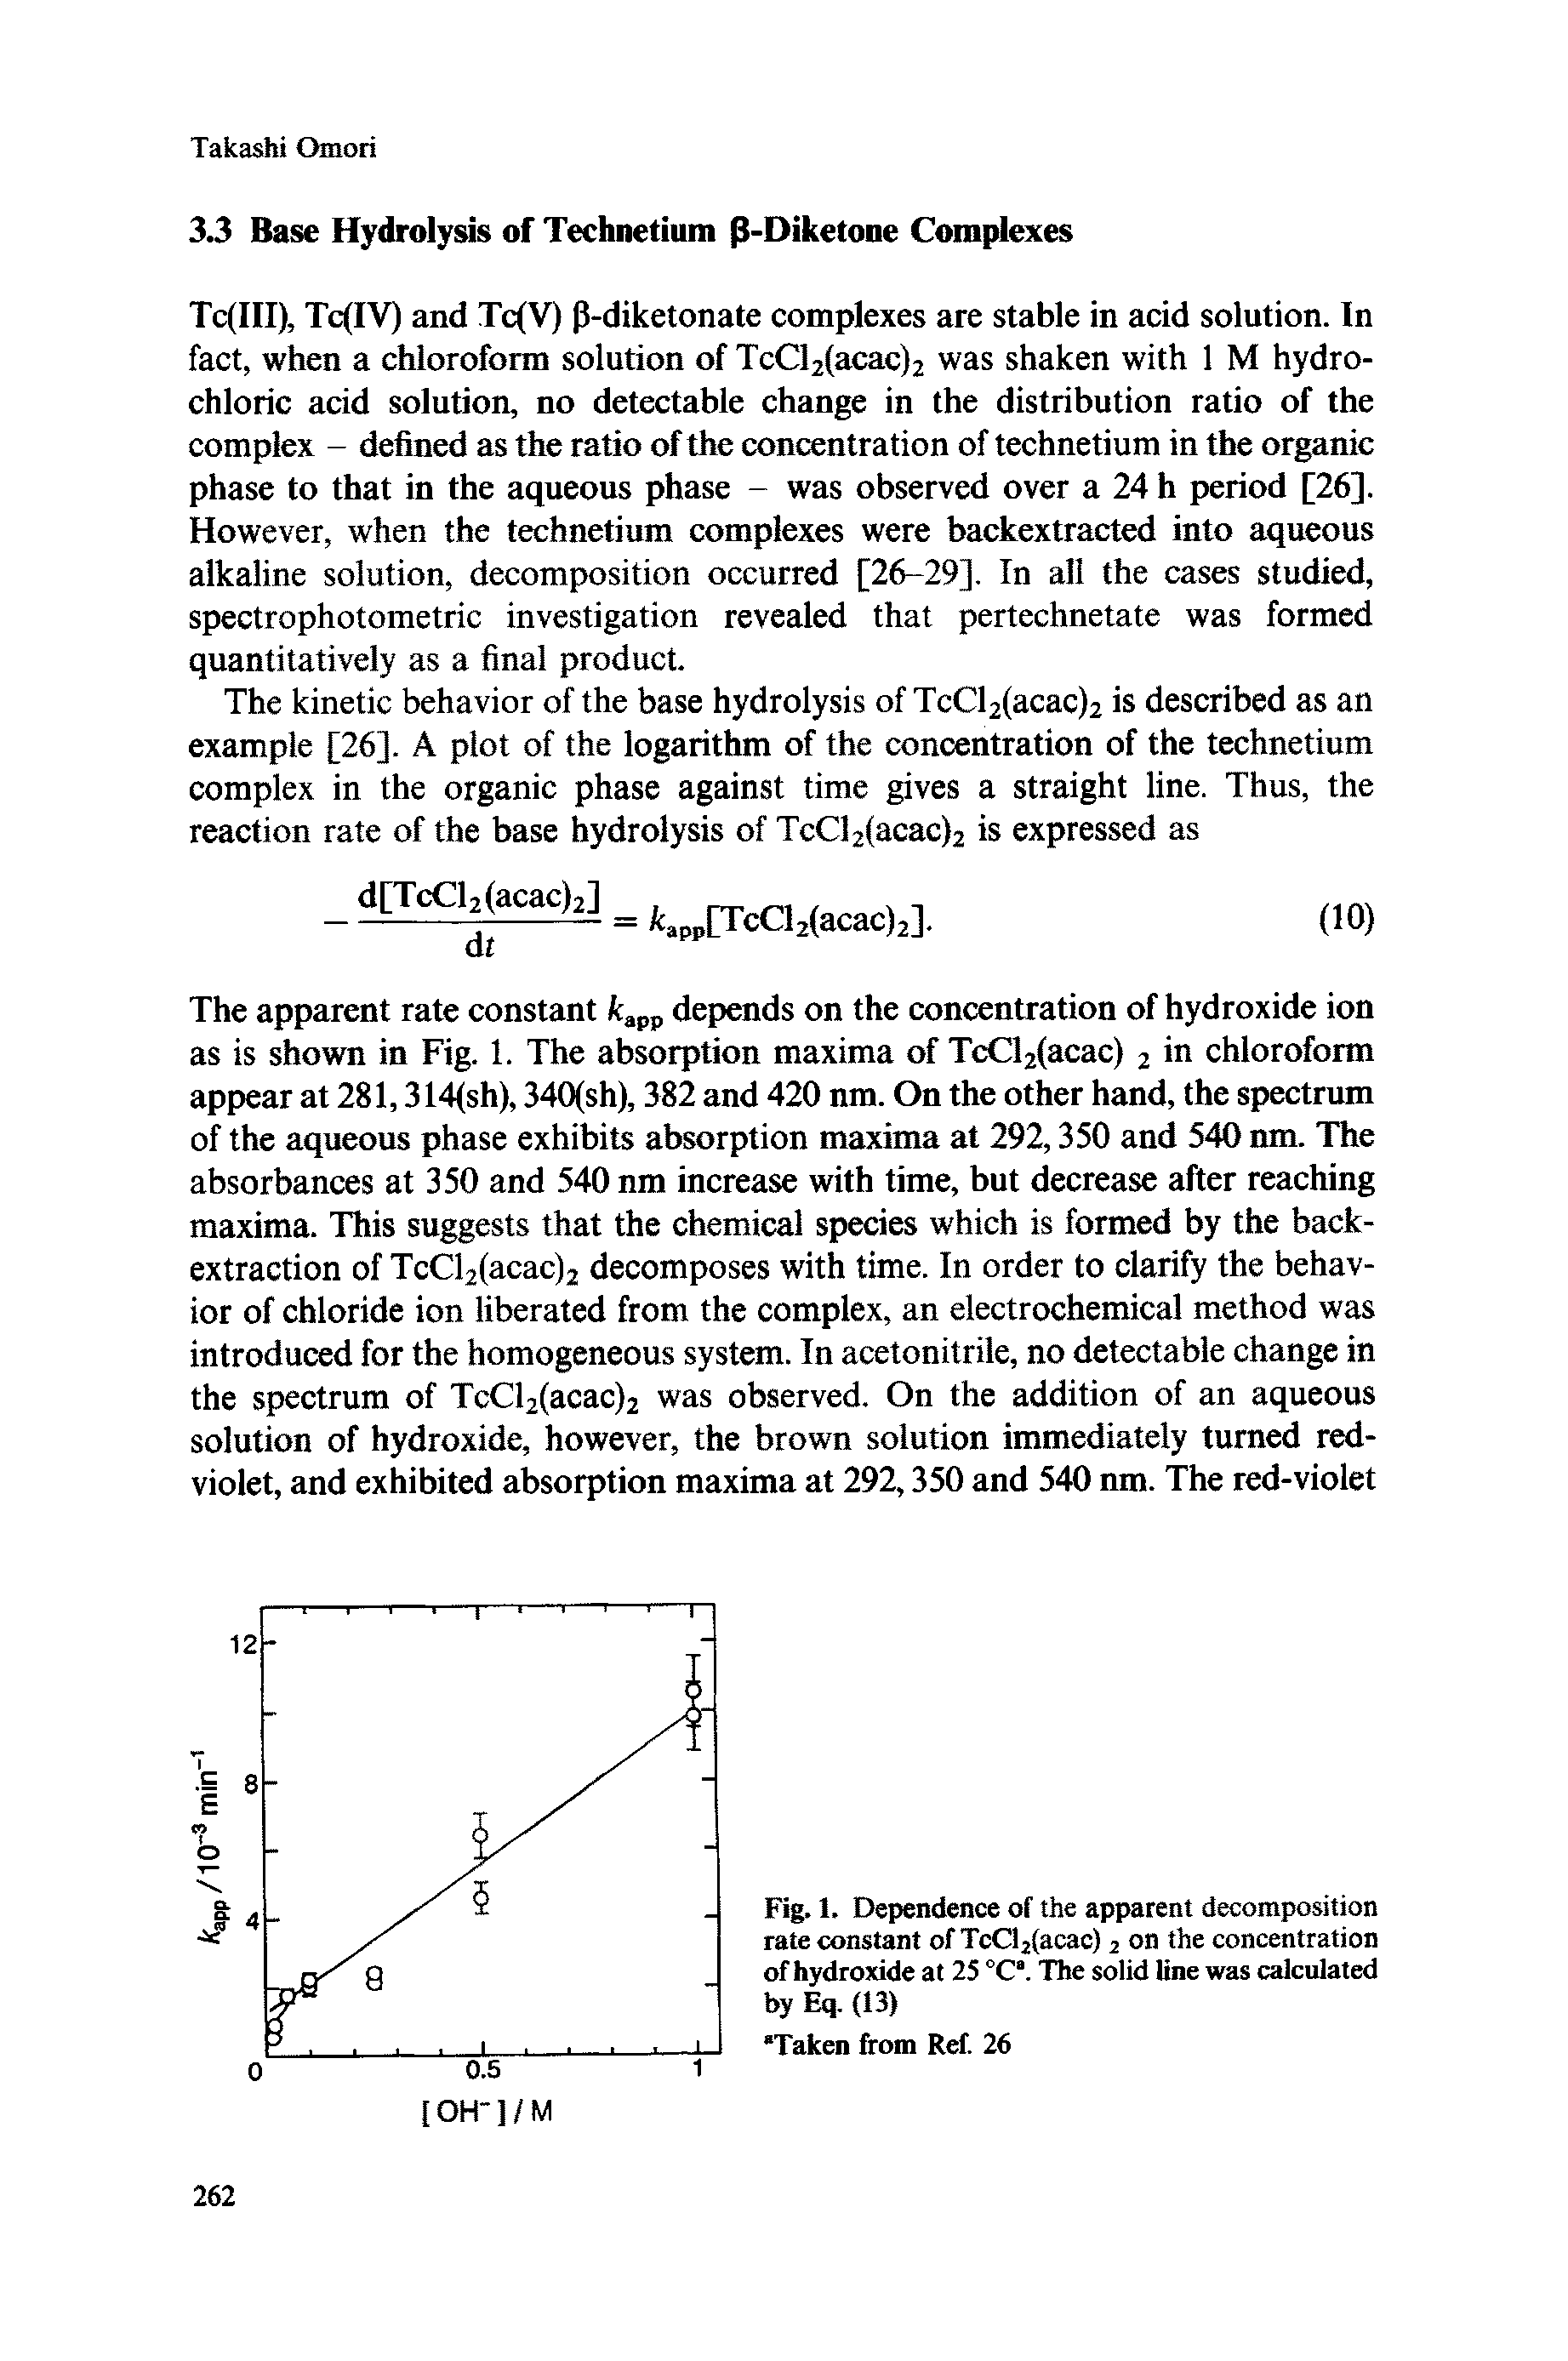 Fig. 1, Dependence of the apparent decomposition rate constant of TcCl2(acac) 2 on the concentration of hydroxide at 25 °Ca. The solid line was calculated by Eq. (13)...